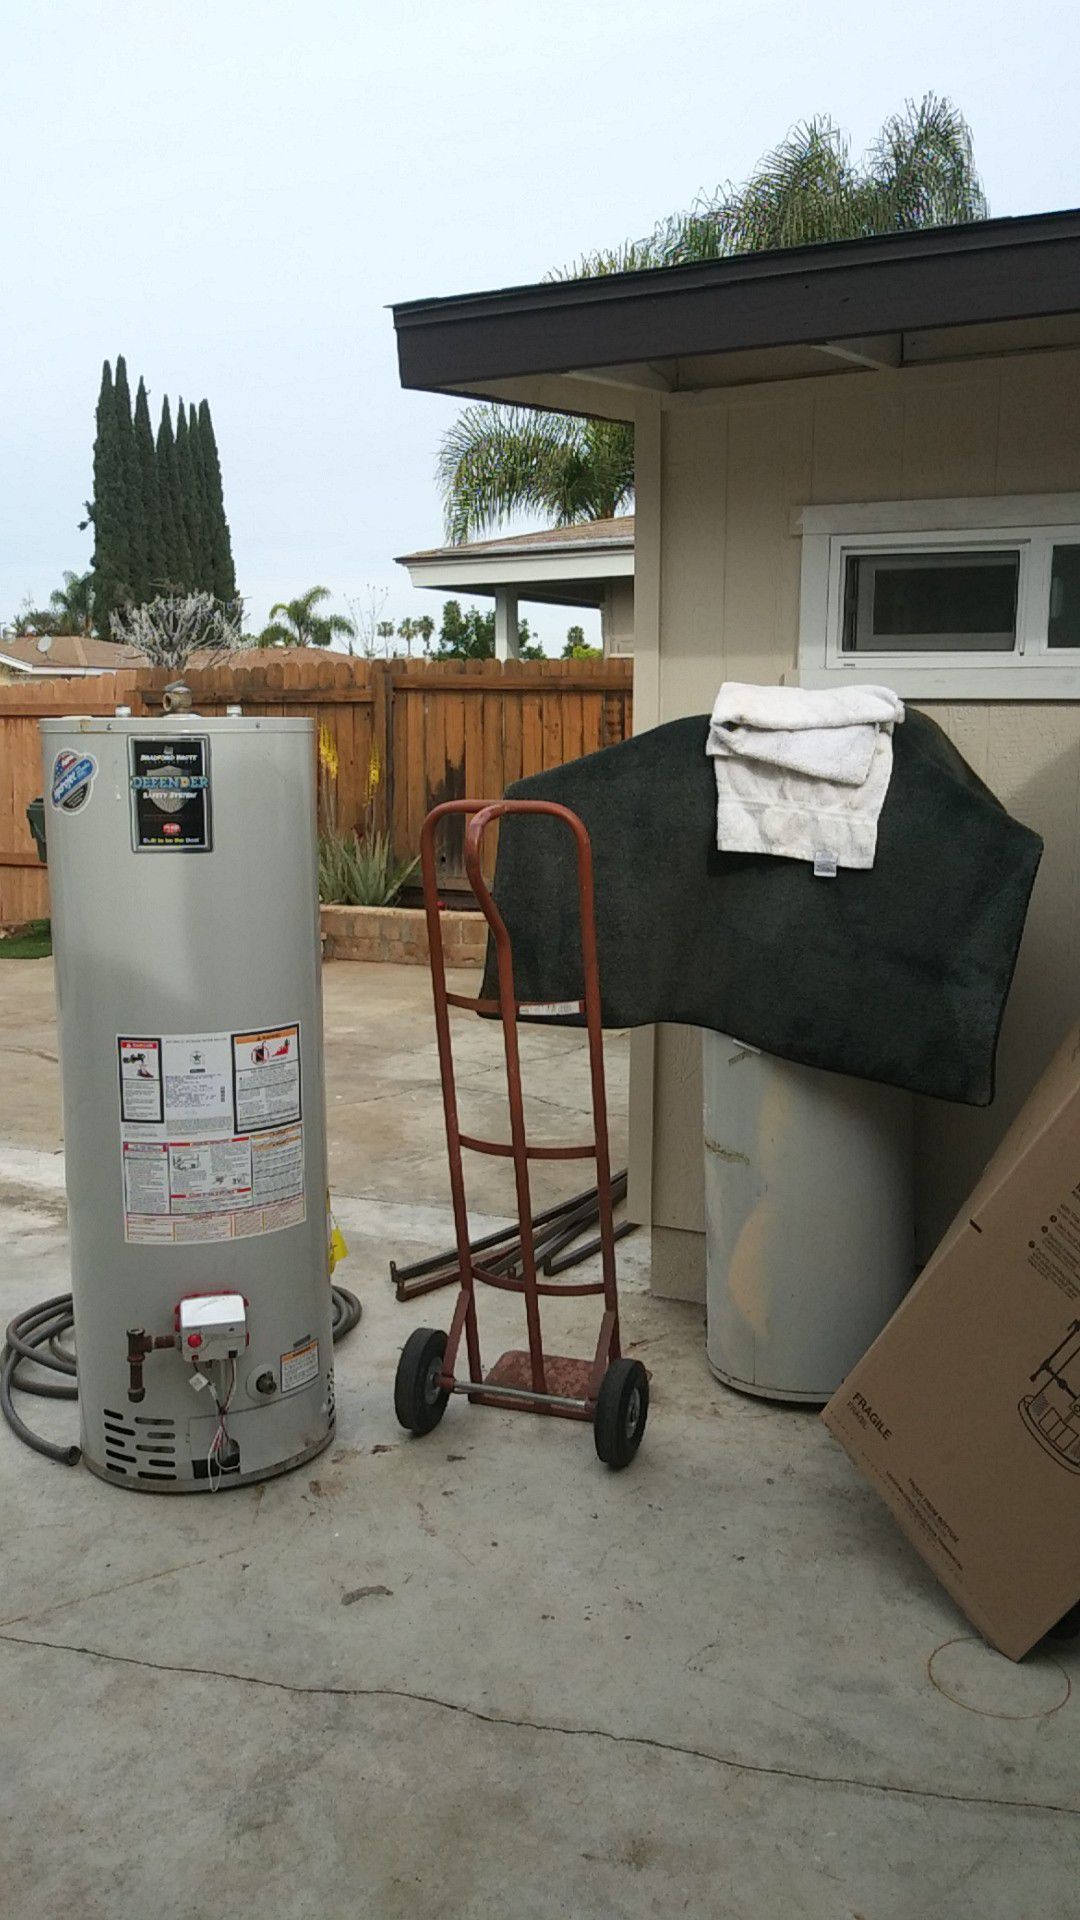 Water Heaters for Free